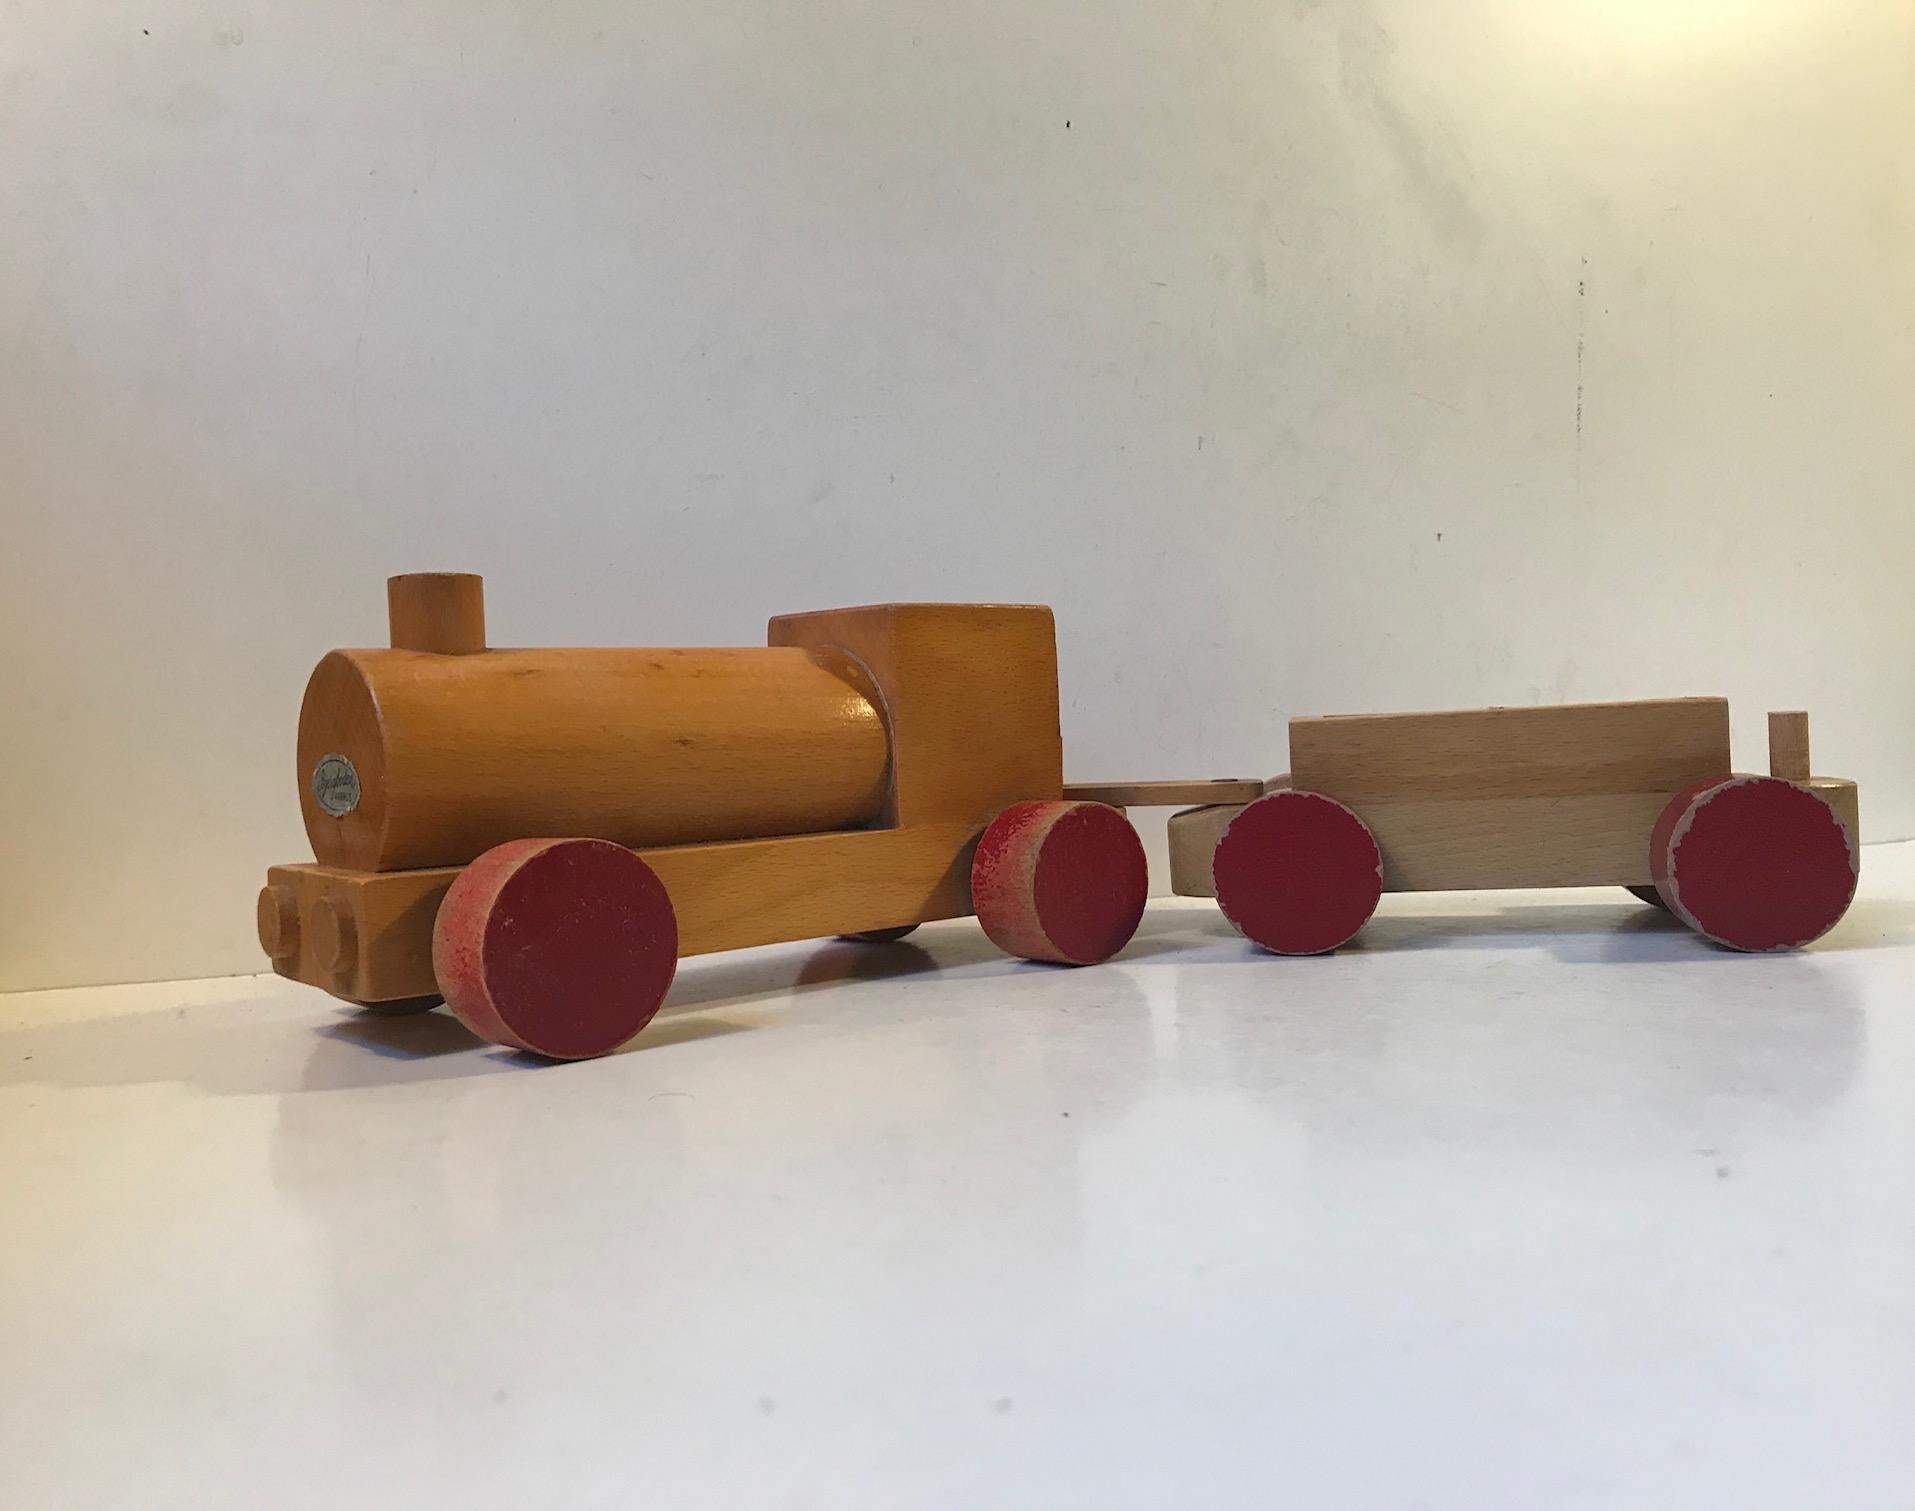 Vintage train or locomotive set made from partially lacquered and painted beechwood. This item surely has been loved and played with for decades and it show in the most charming way. It was designed by Kay Bojesen and manufactured in his own